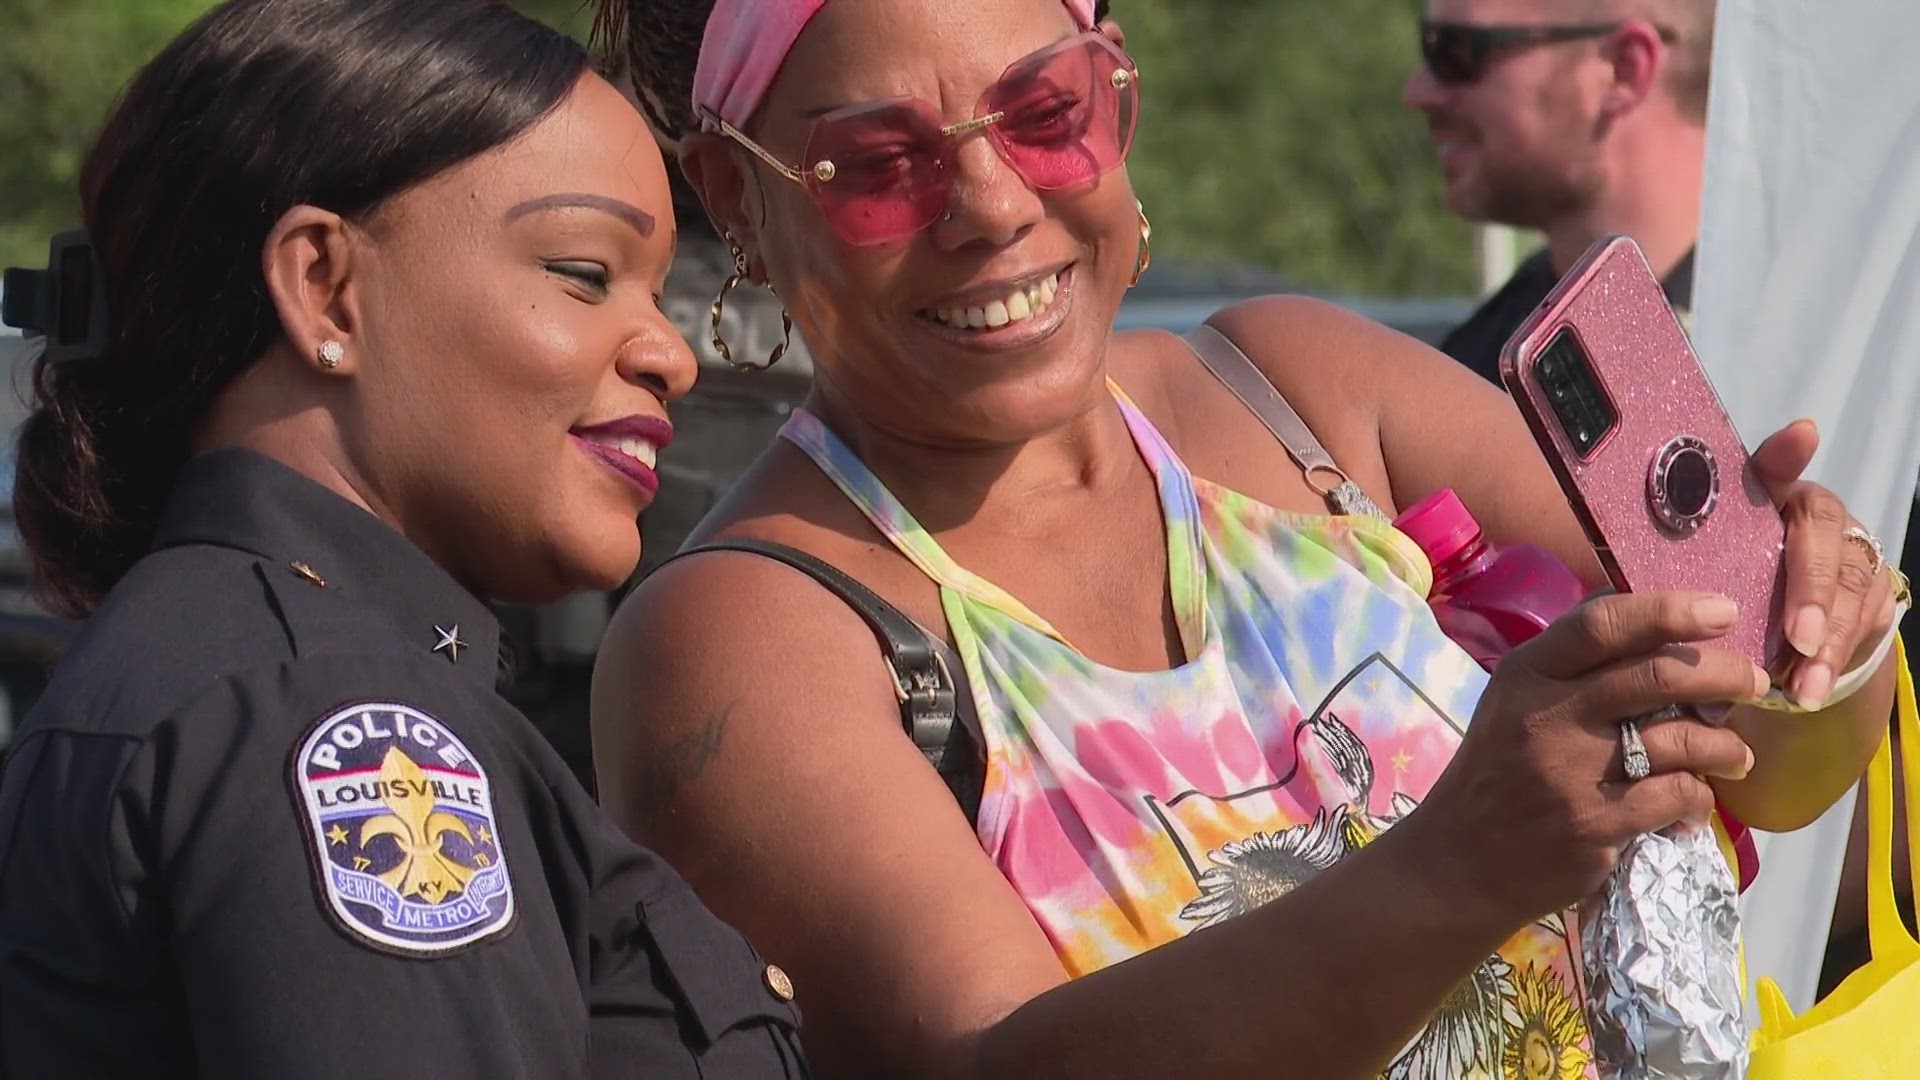 Louisville police officers and community members came together to discuss neighborhood happenings while fostering relationships during the annual National Night Out.